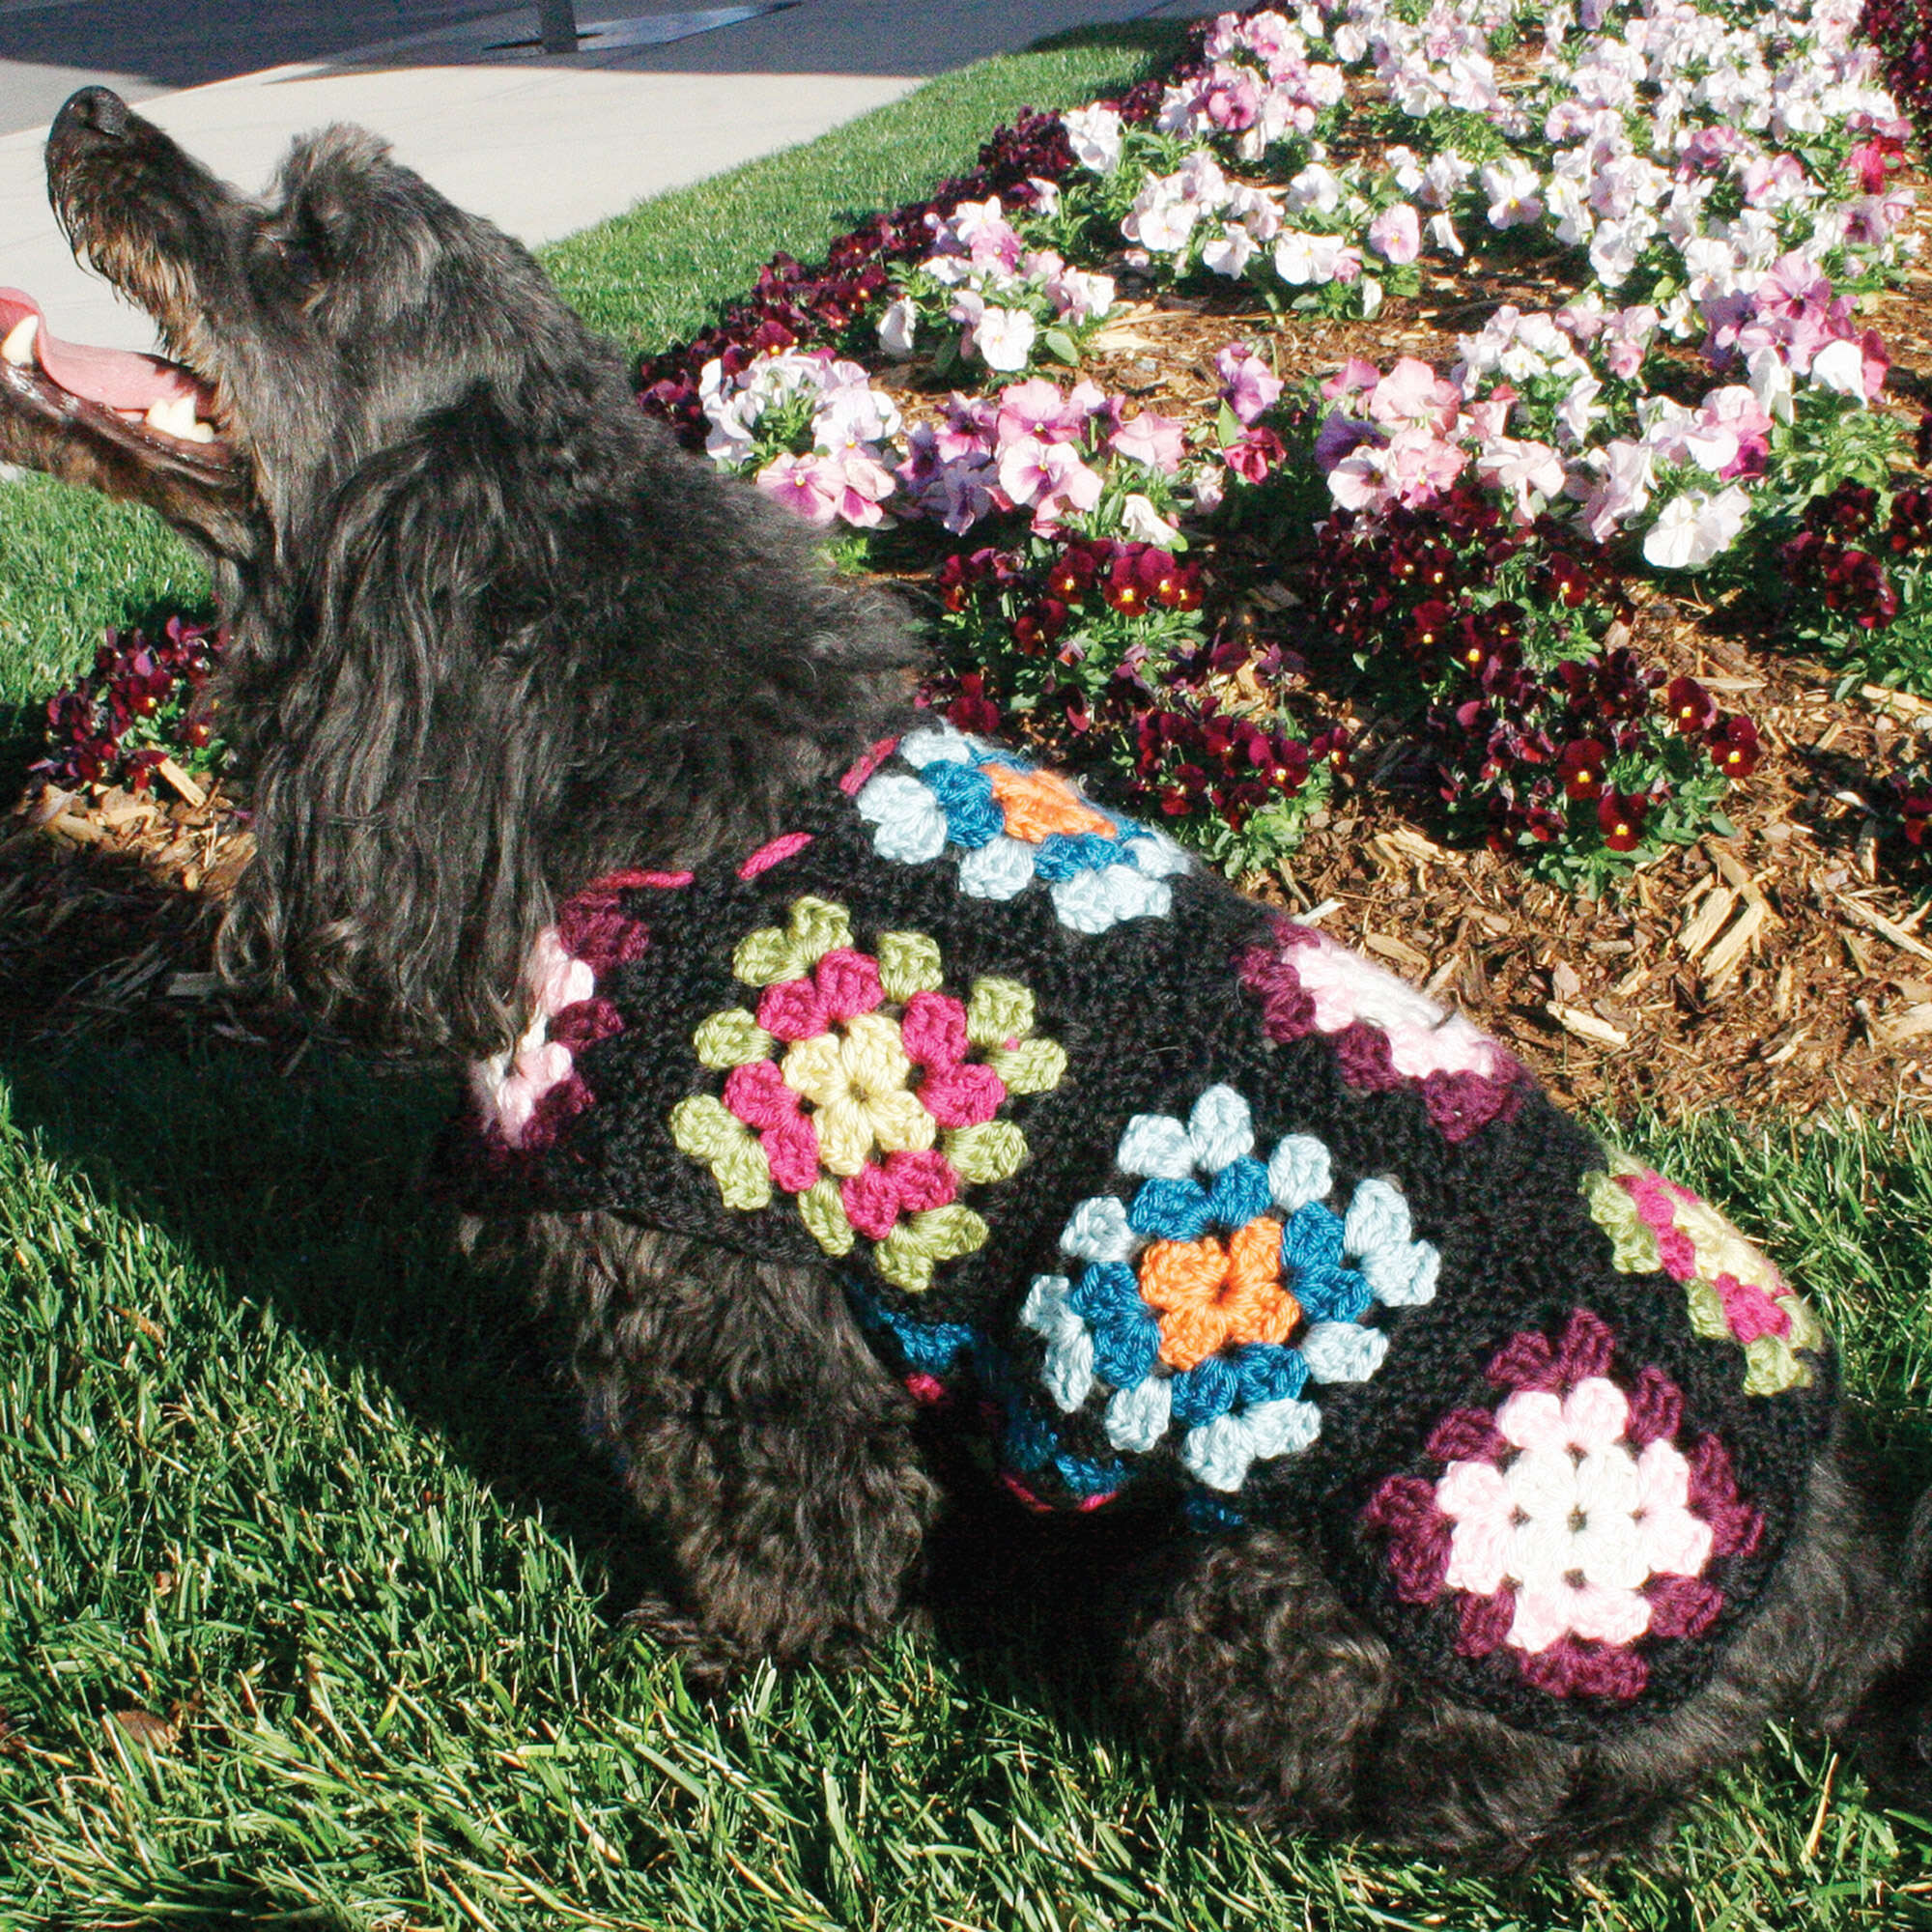 Crochet a Cozy Sweater for your Furry Friend!